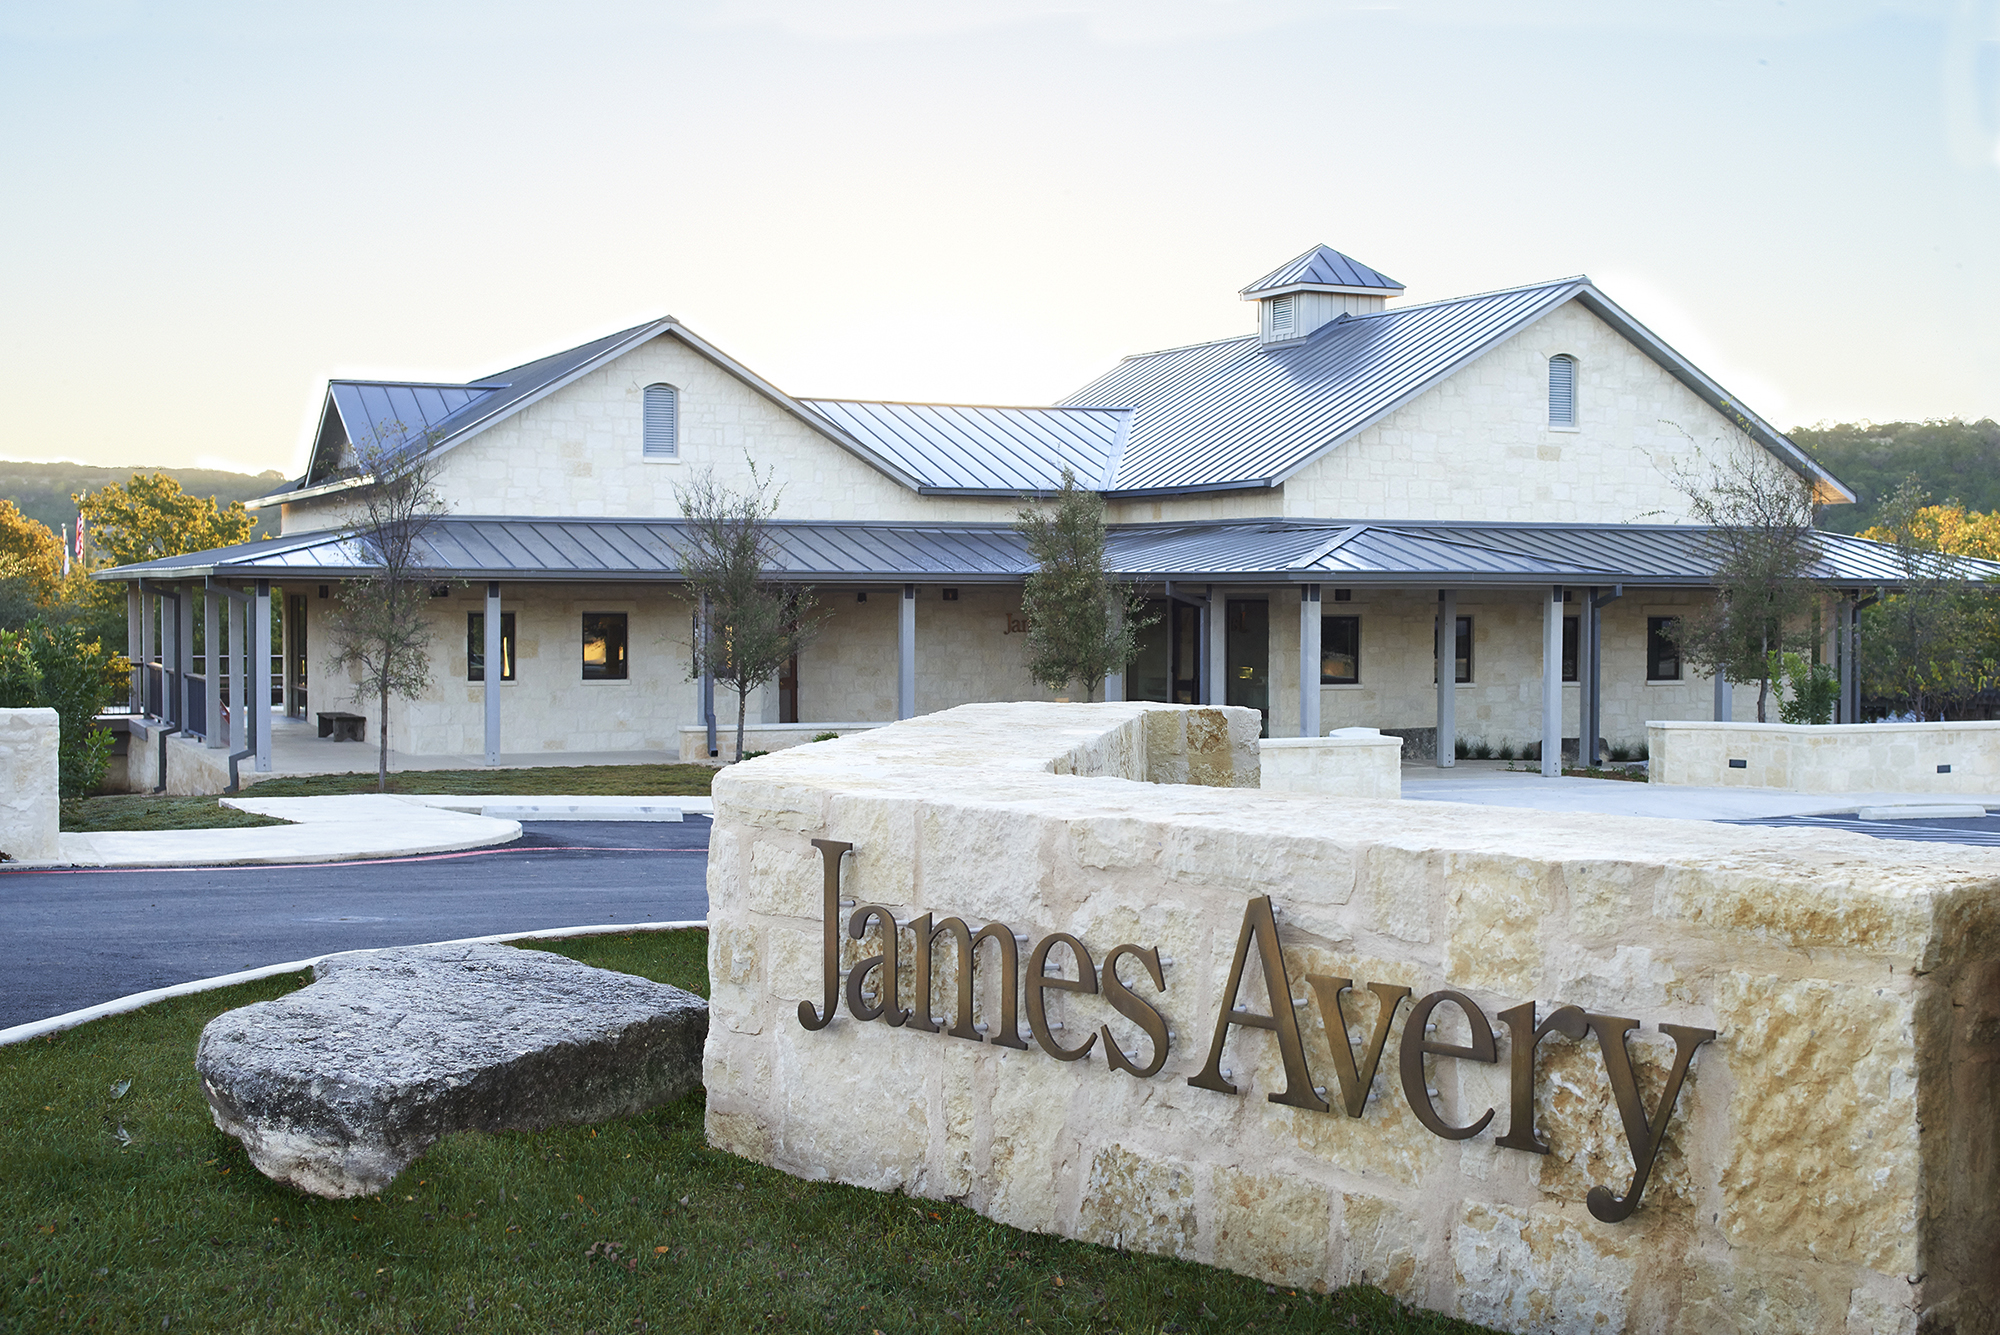 James Avery Jewelry Store in San Antonio, TX - South Park Mall